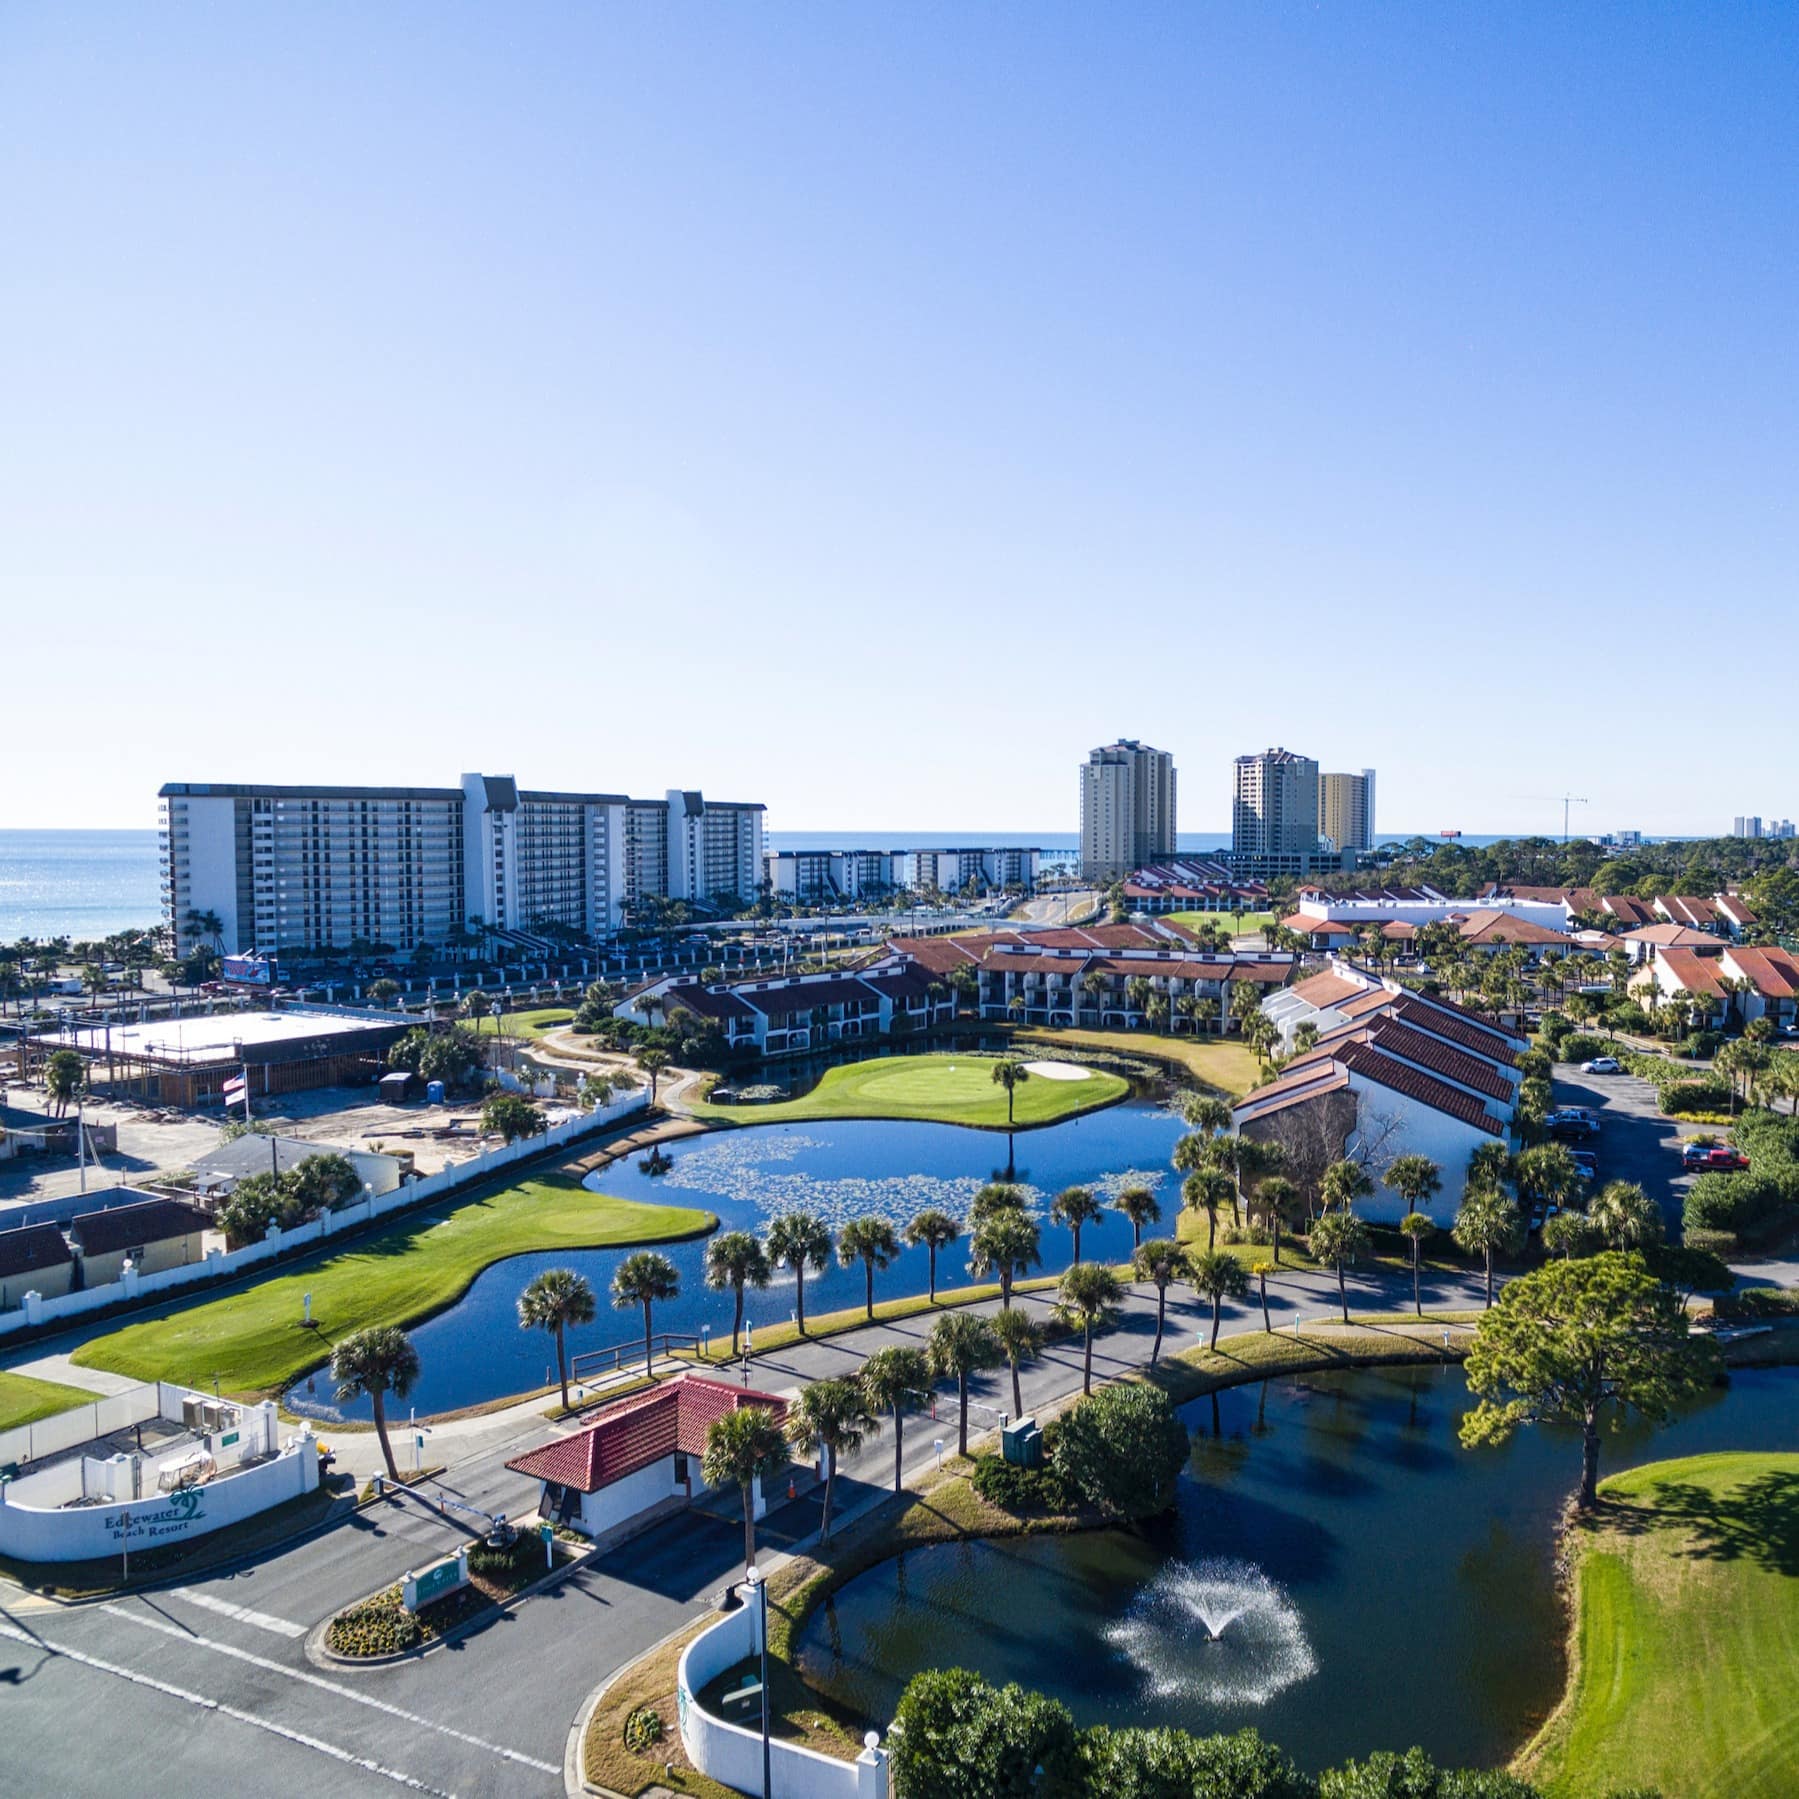 A view across Panama City Beach that has lakes, lawns, houses and condo blocks